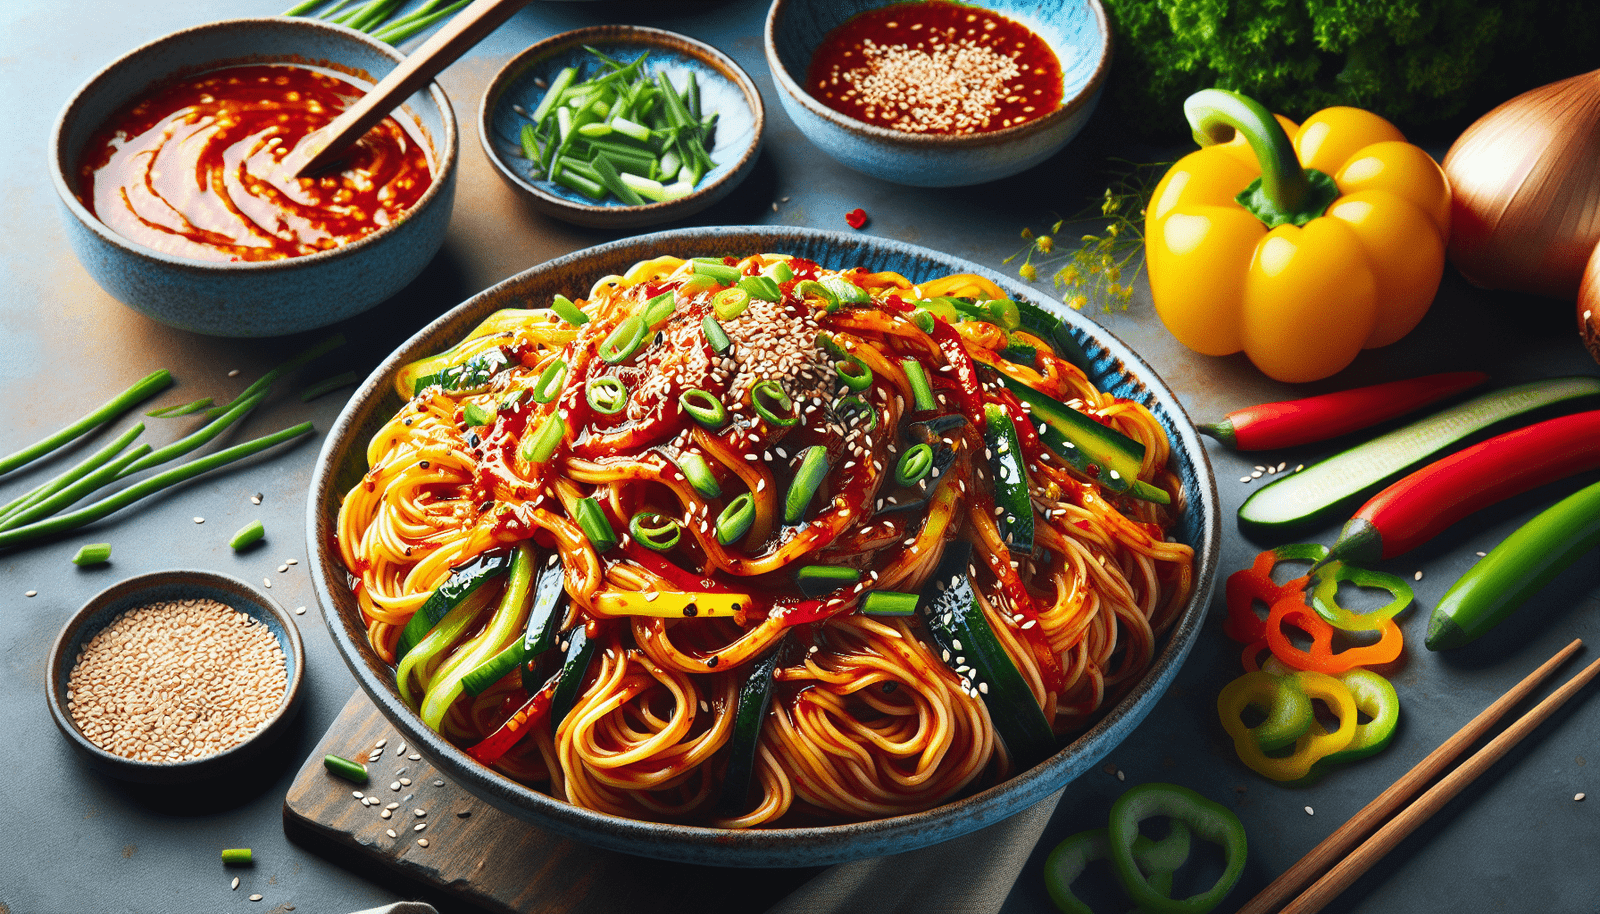 Can You Share Tips For Making The Perfect Bowl Of Traditional Korean Bibim Guksu?